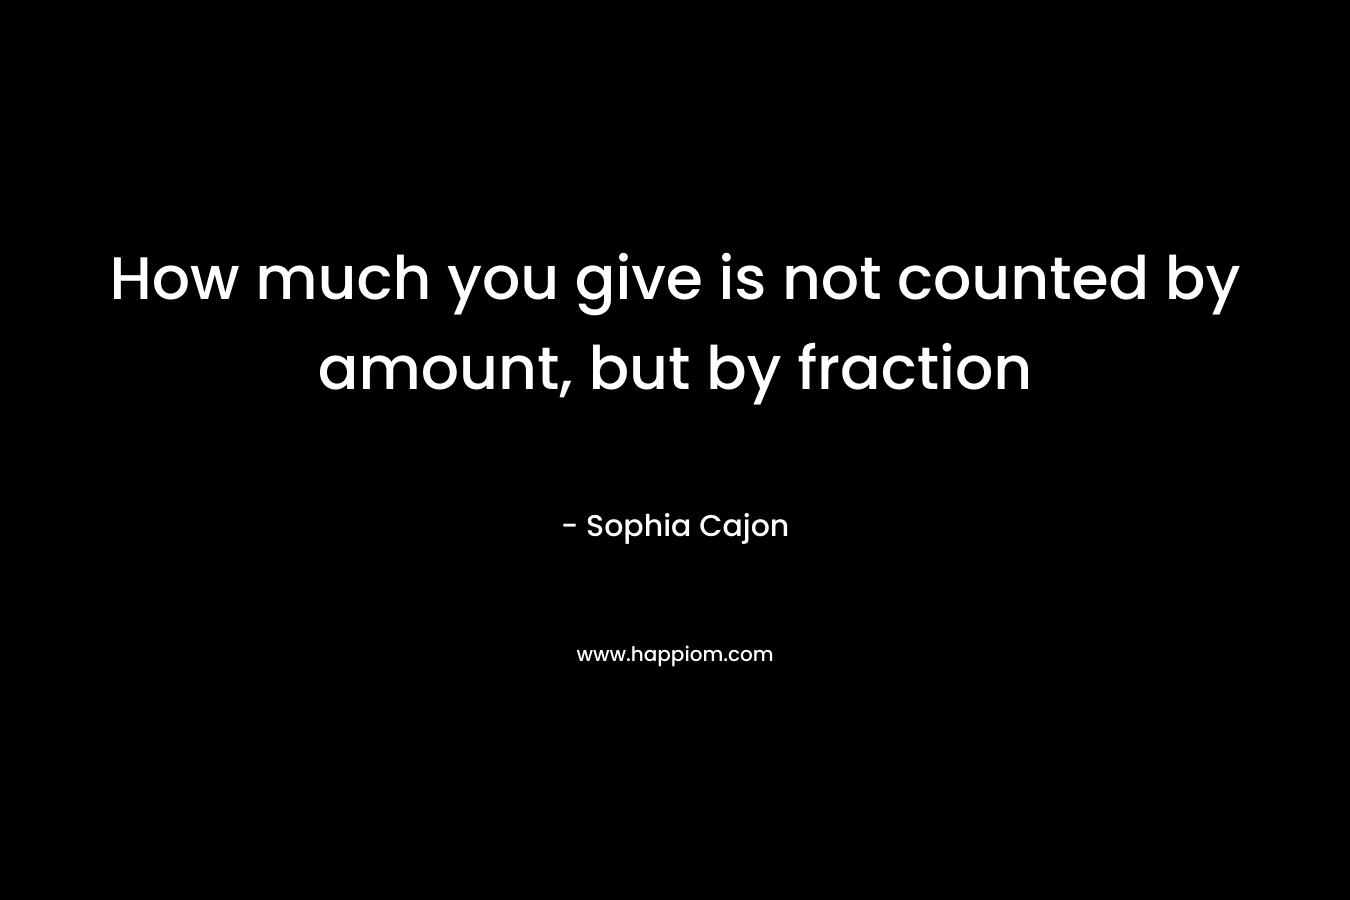 How much you give is not counted by amount, but by fraction – Sophia Cajon